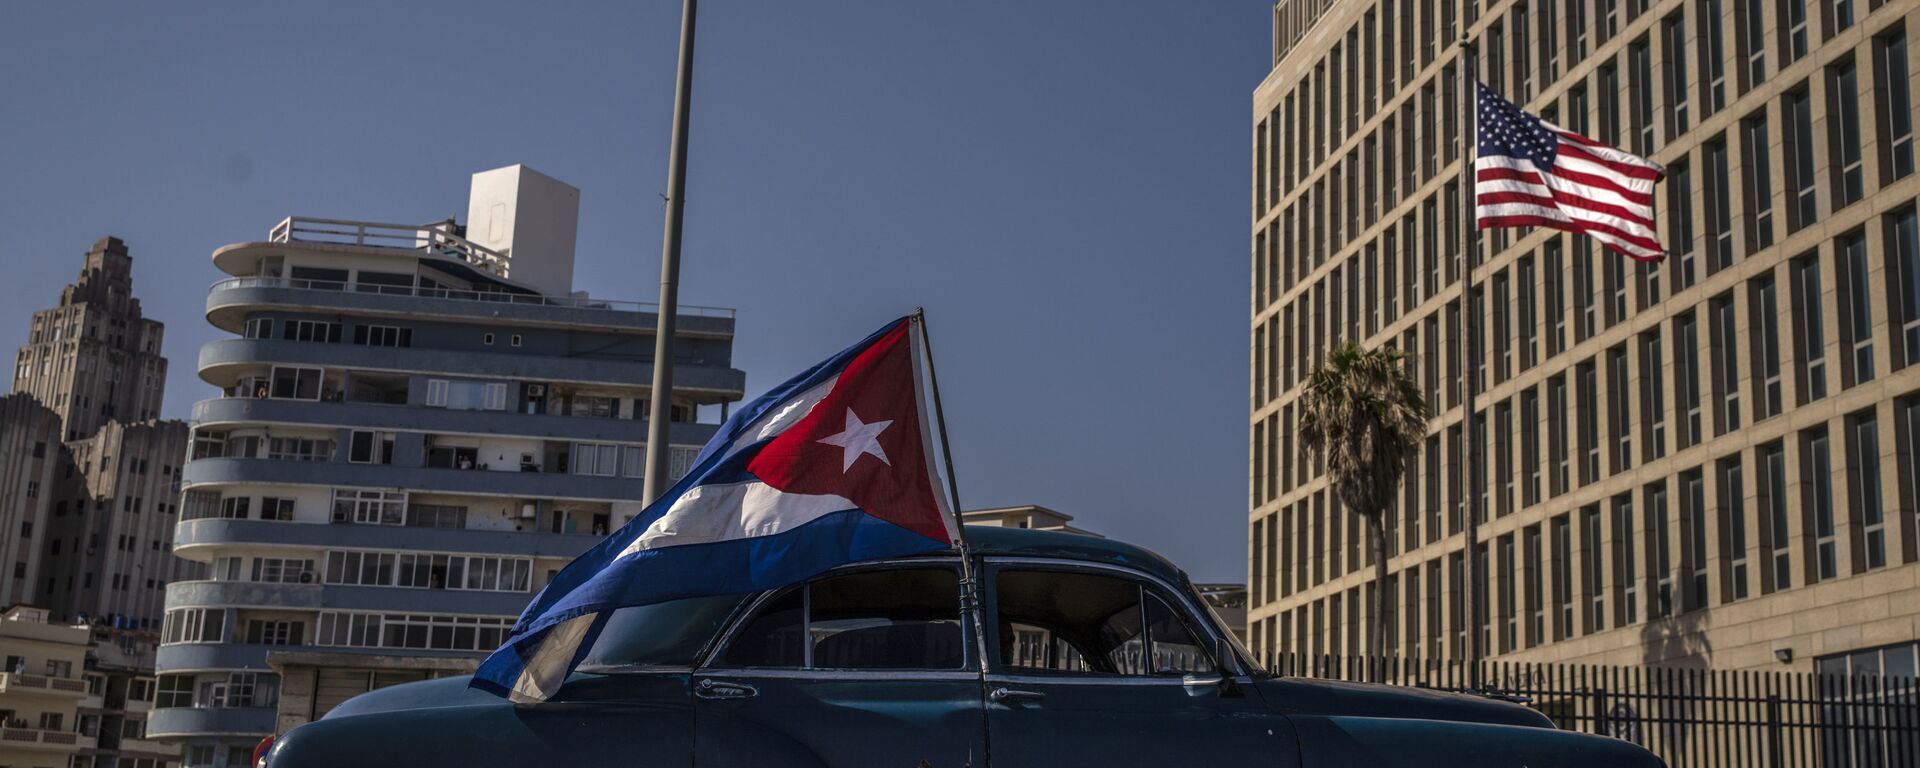 A classic American car flying a Cuban flag drives past the American embassy during a rally calling for the end of the US blockade against the island nation, in Havana, Cuba, Sunday, March 28, 2021. - Sputnik International, 1920, 23.02.2022